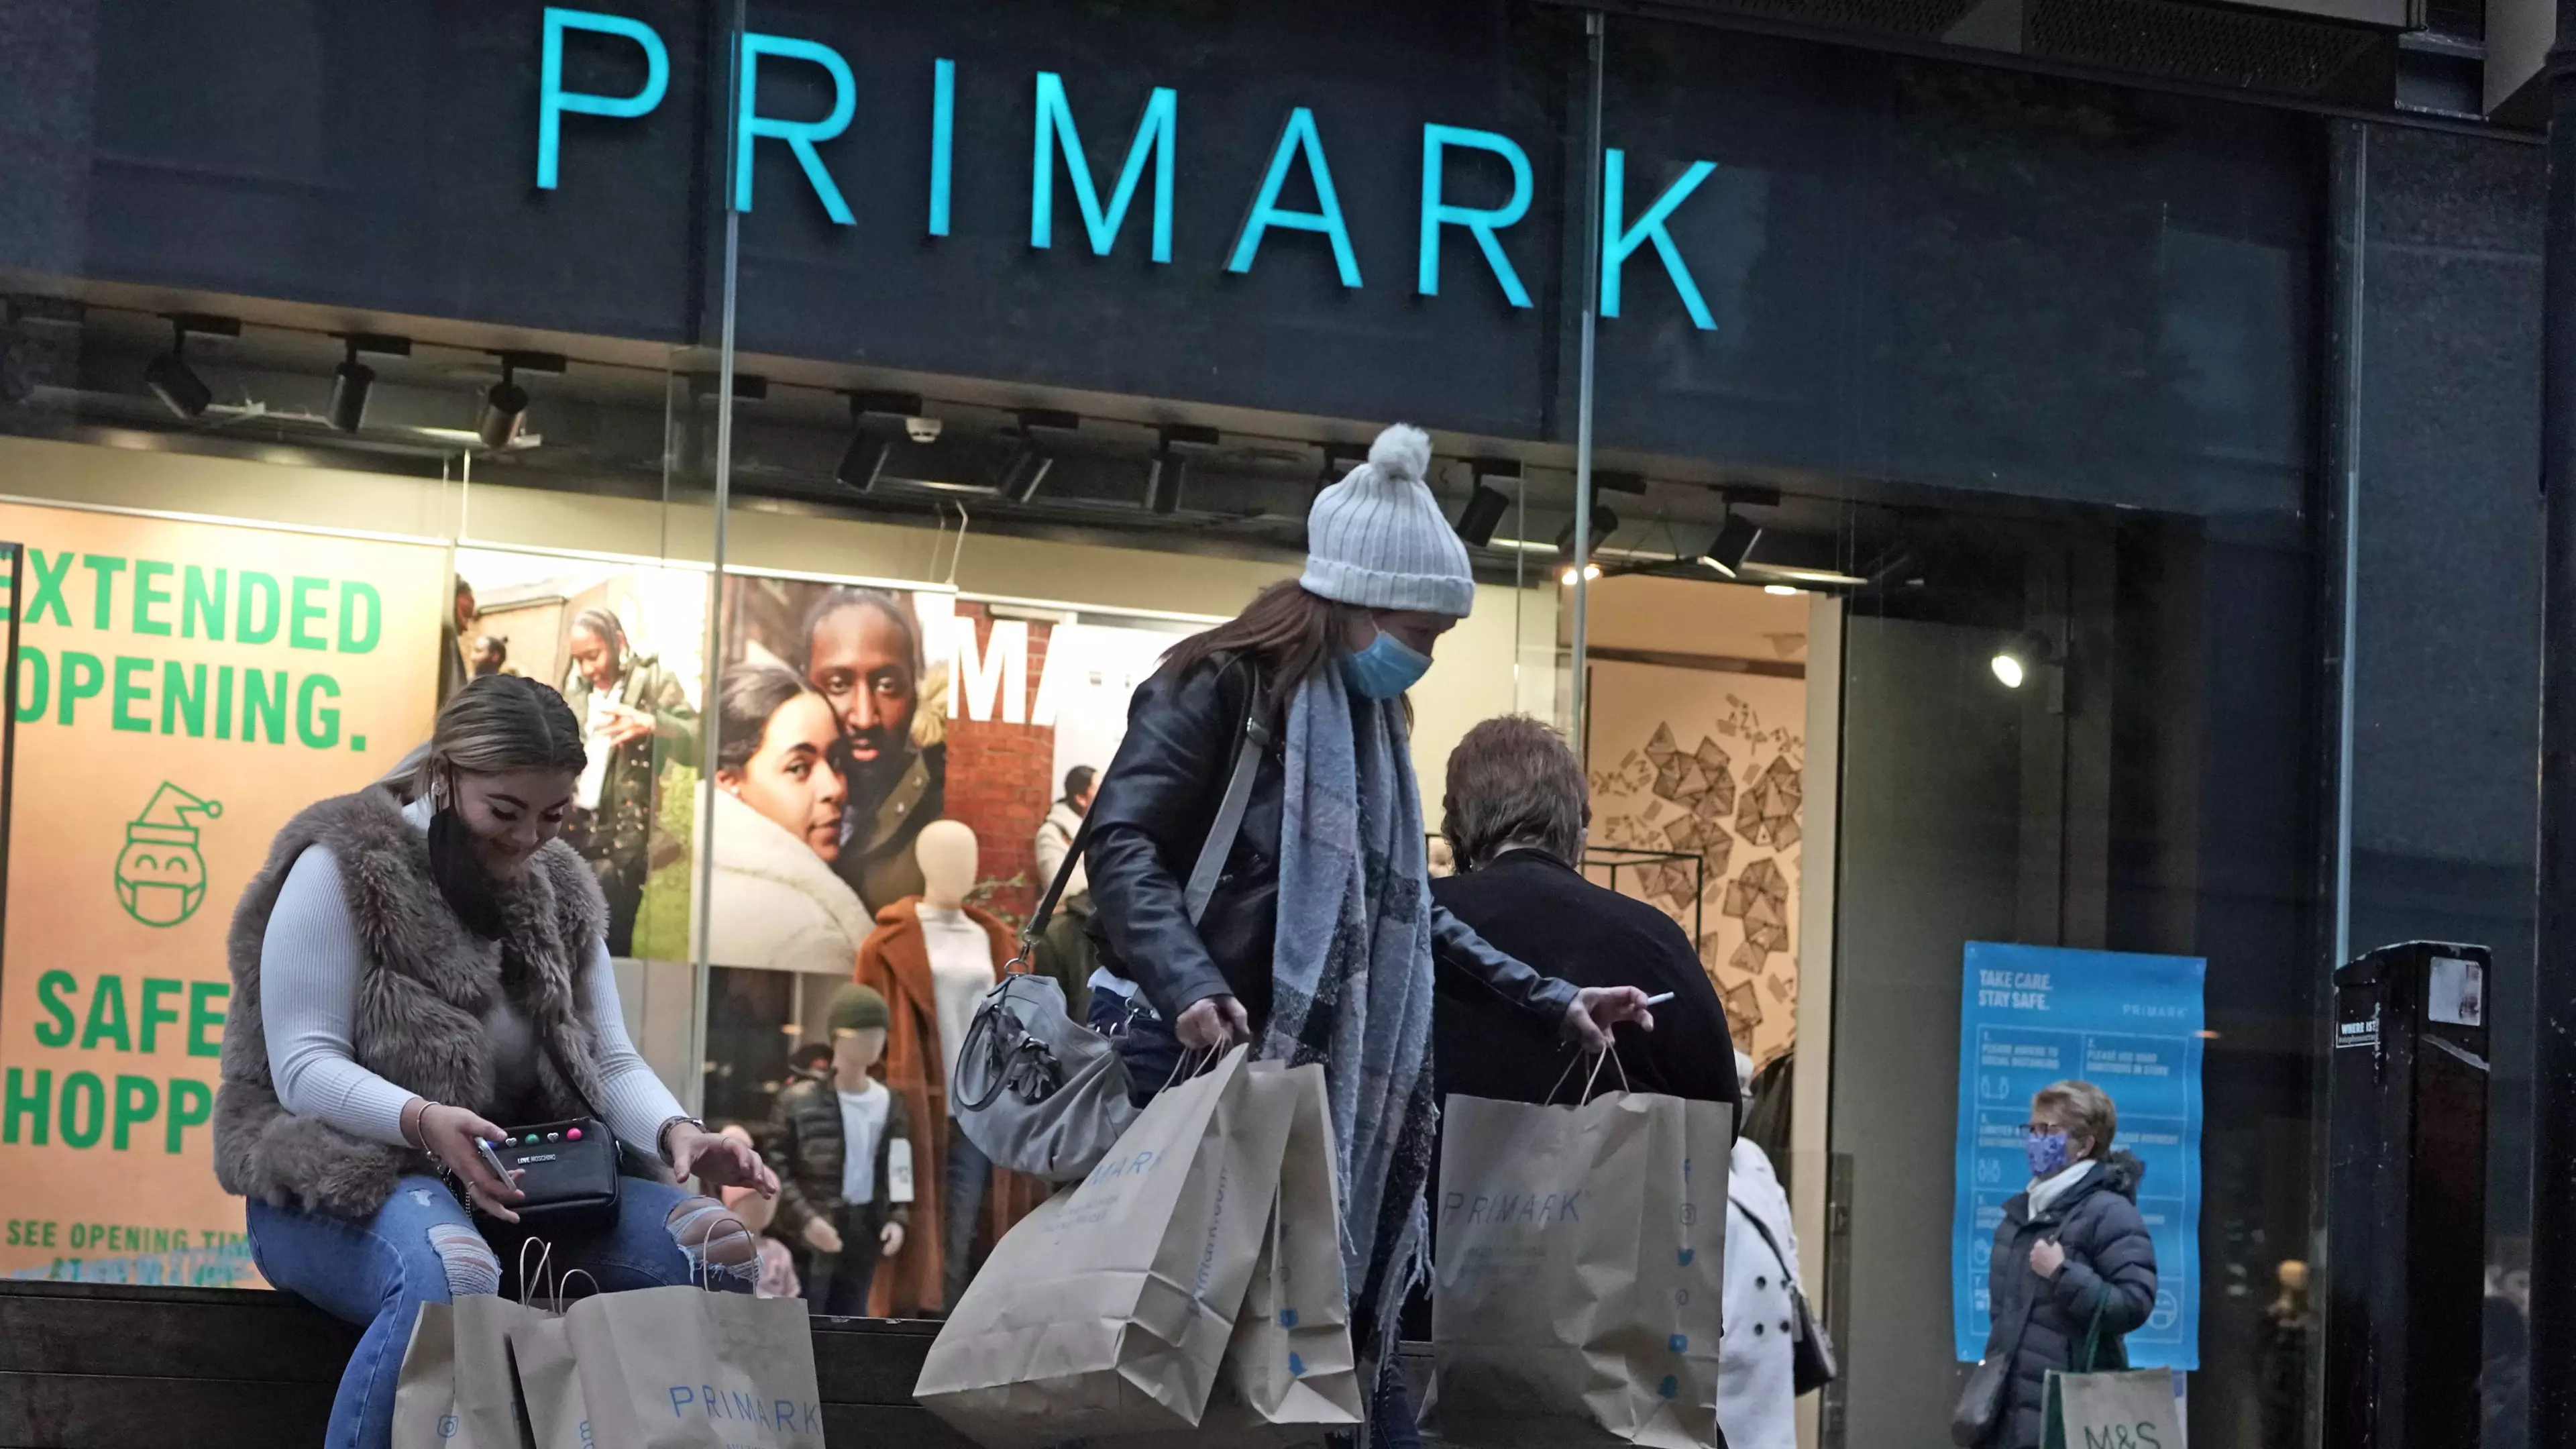 People Queue Outside Primark From Early Hours On First Day Of Reopening